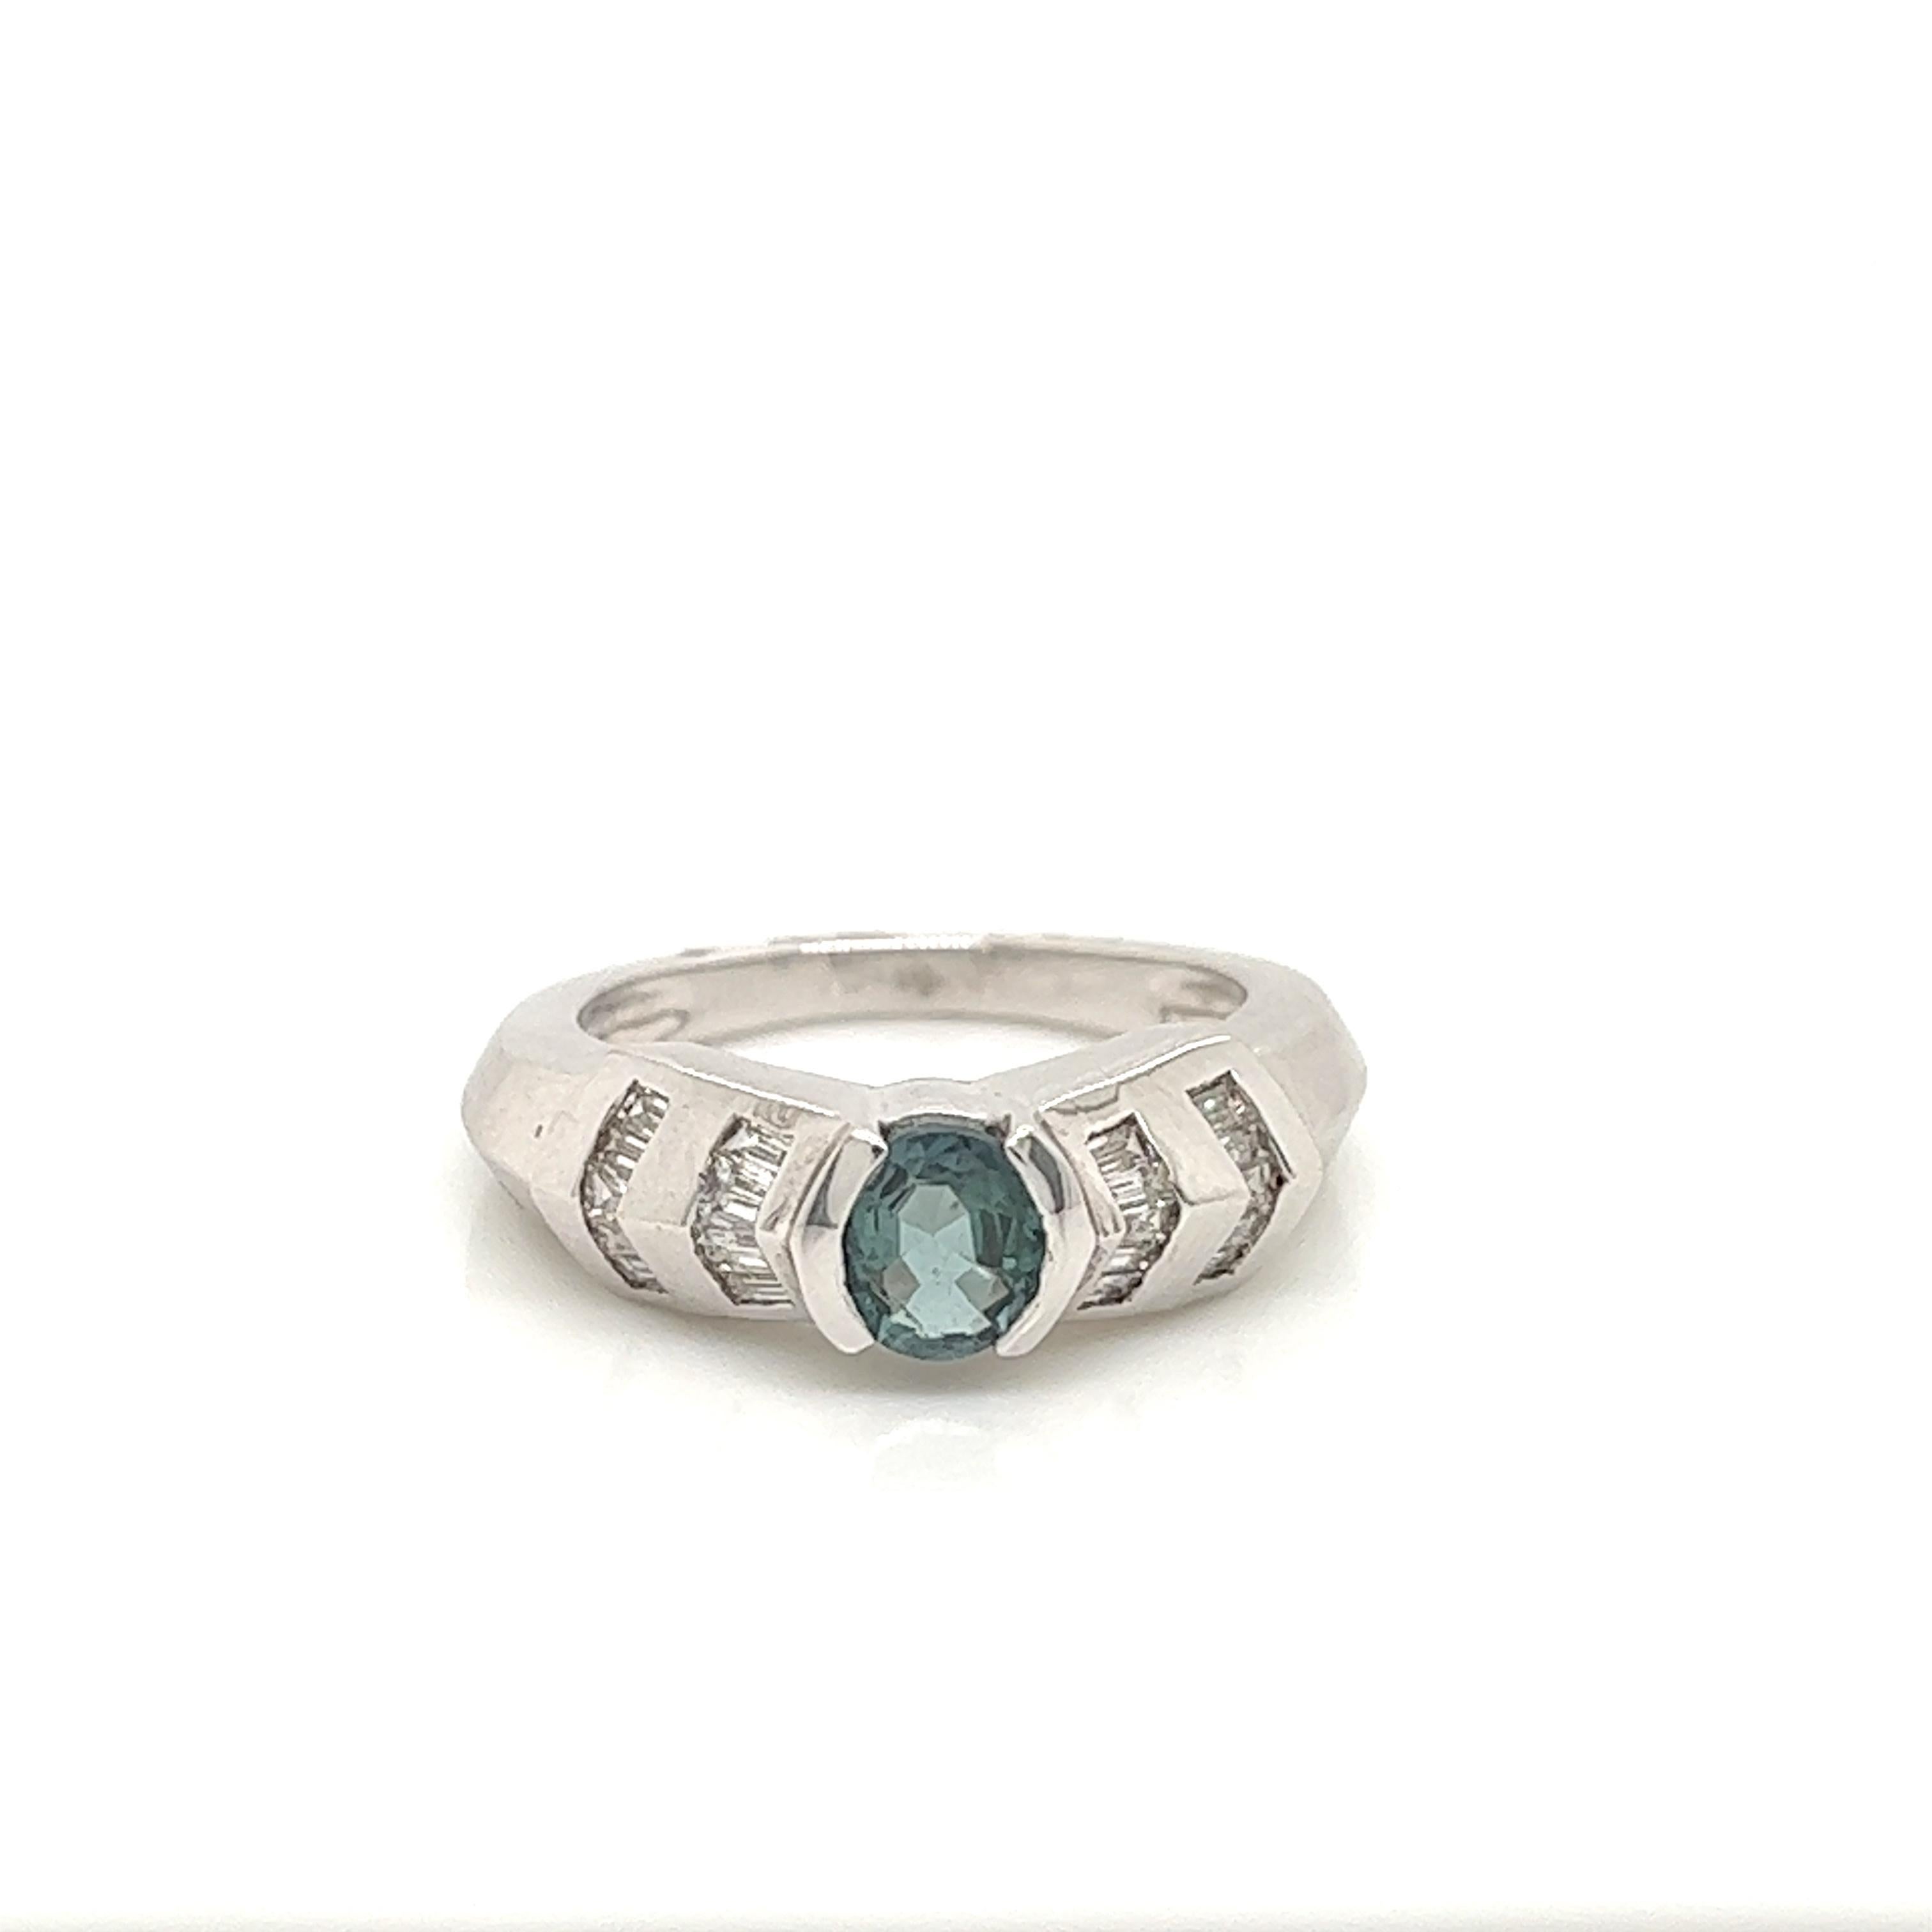 This is a gorgeous natural AAA quality Oval Alexandrite with Baguette diamonds that is set in solid 18K white gold. This ring features a natural 0.66 carat oval alexandrite that is certified by the Gemological Institute of America (GIA). The ring is